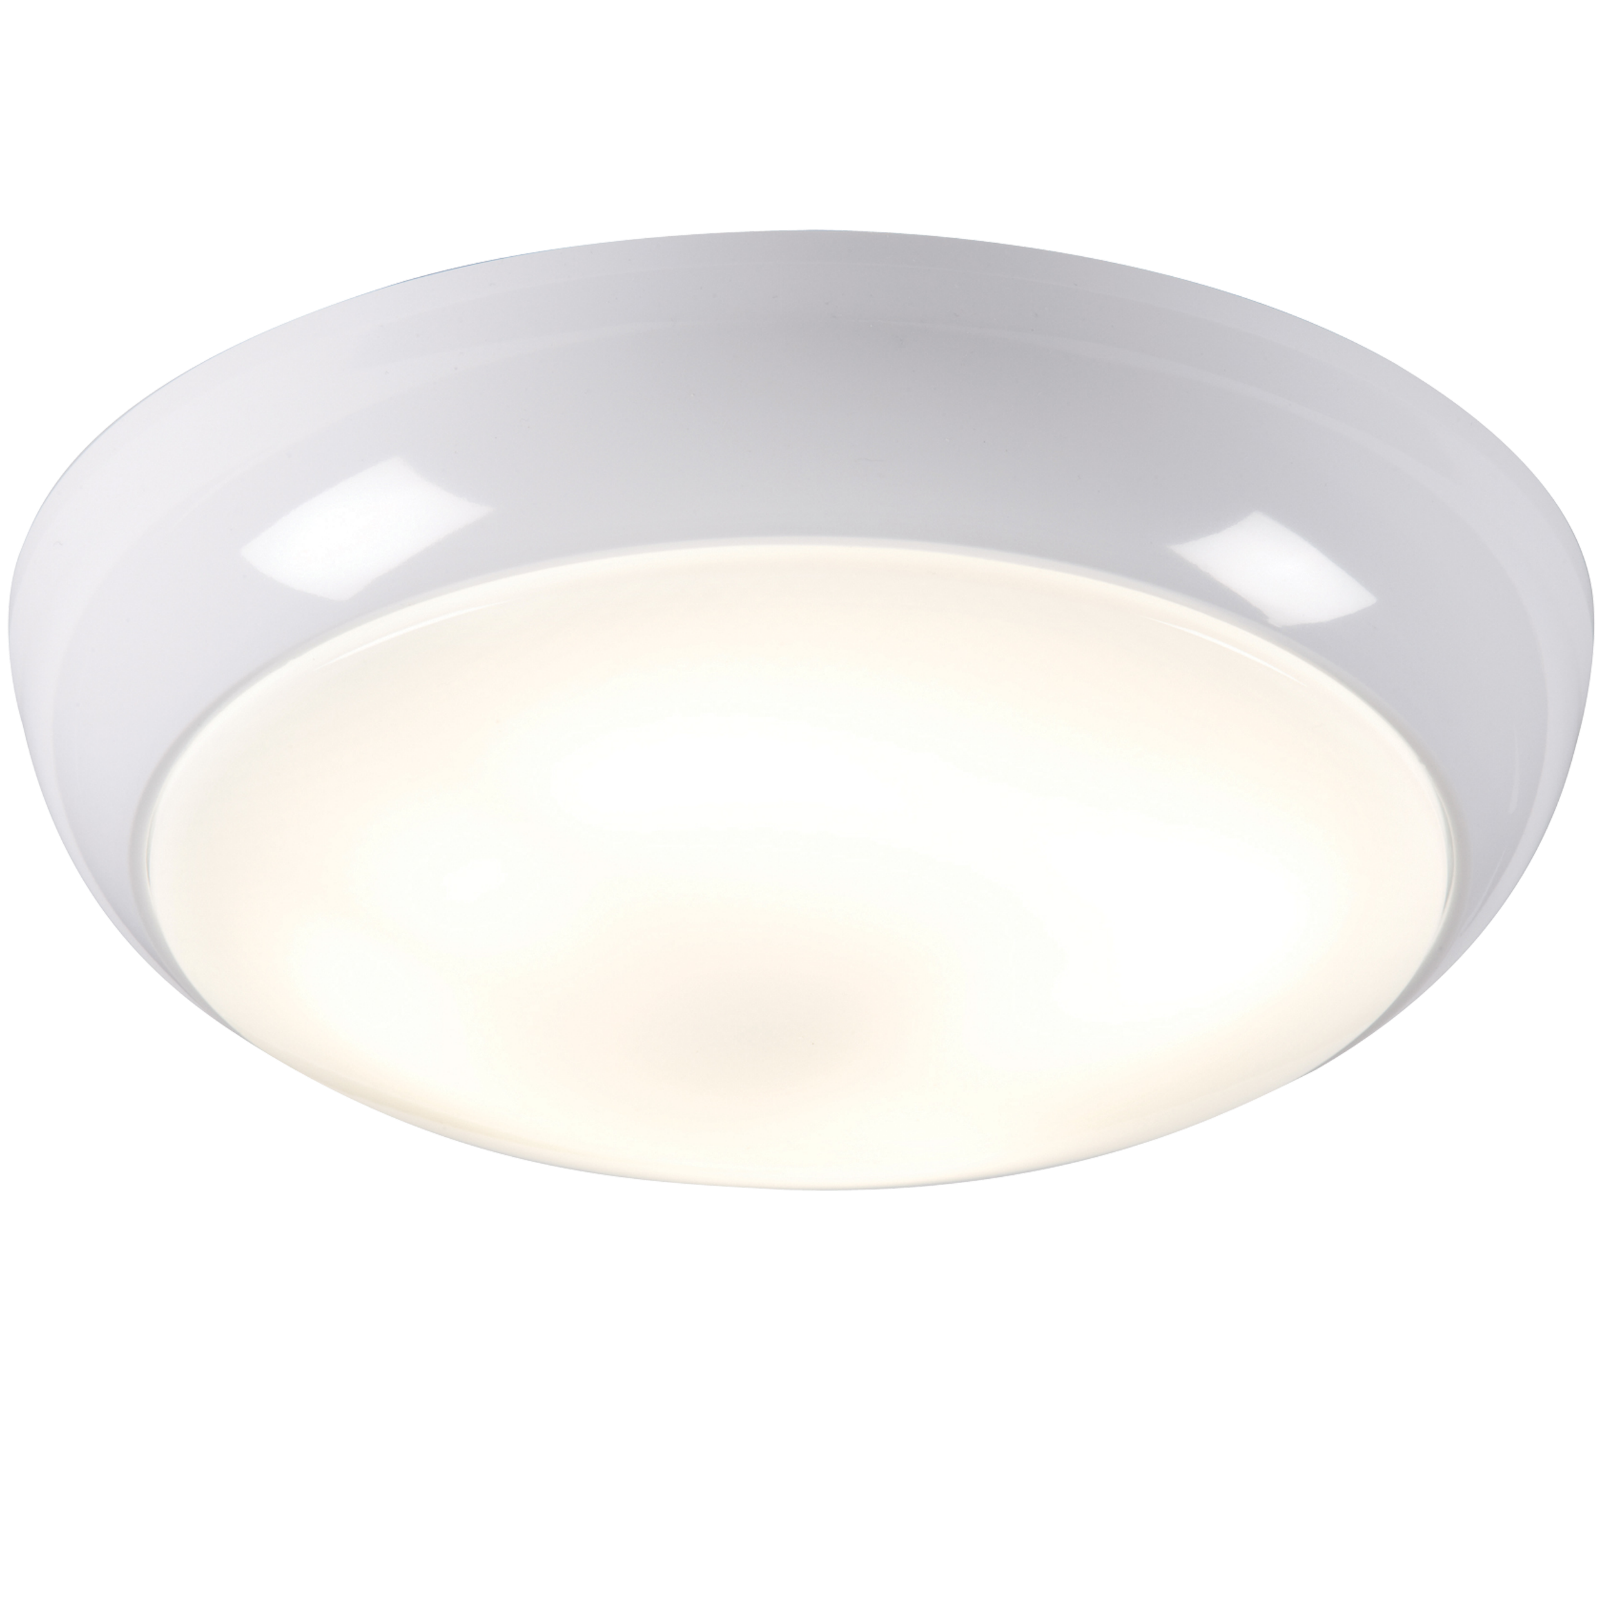 ML Accessories-TPB28MSEMHF IP44 28W HF Emergency Polo Bulkhead with Opal Diffuser, White Base and microwave sensor